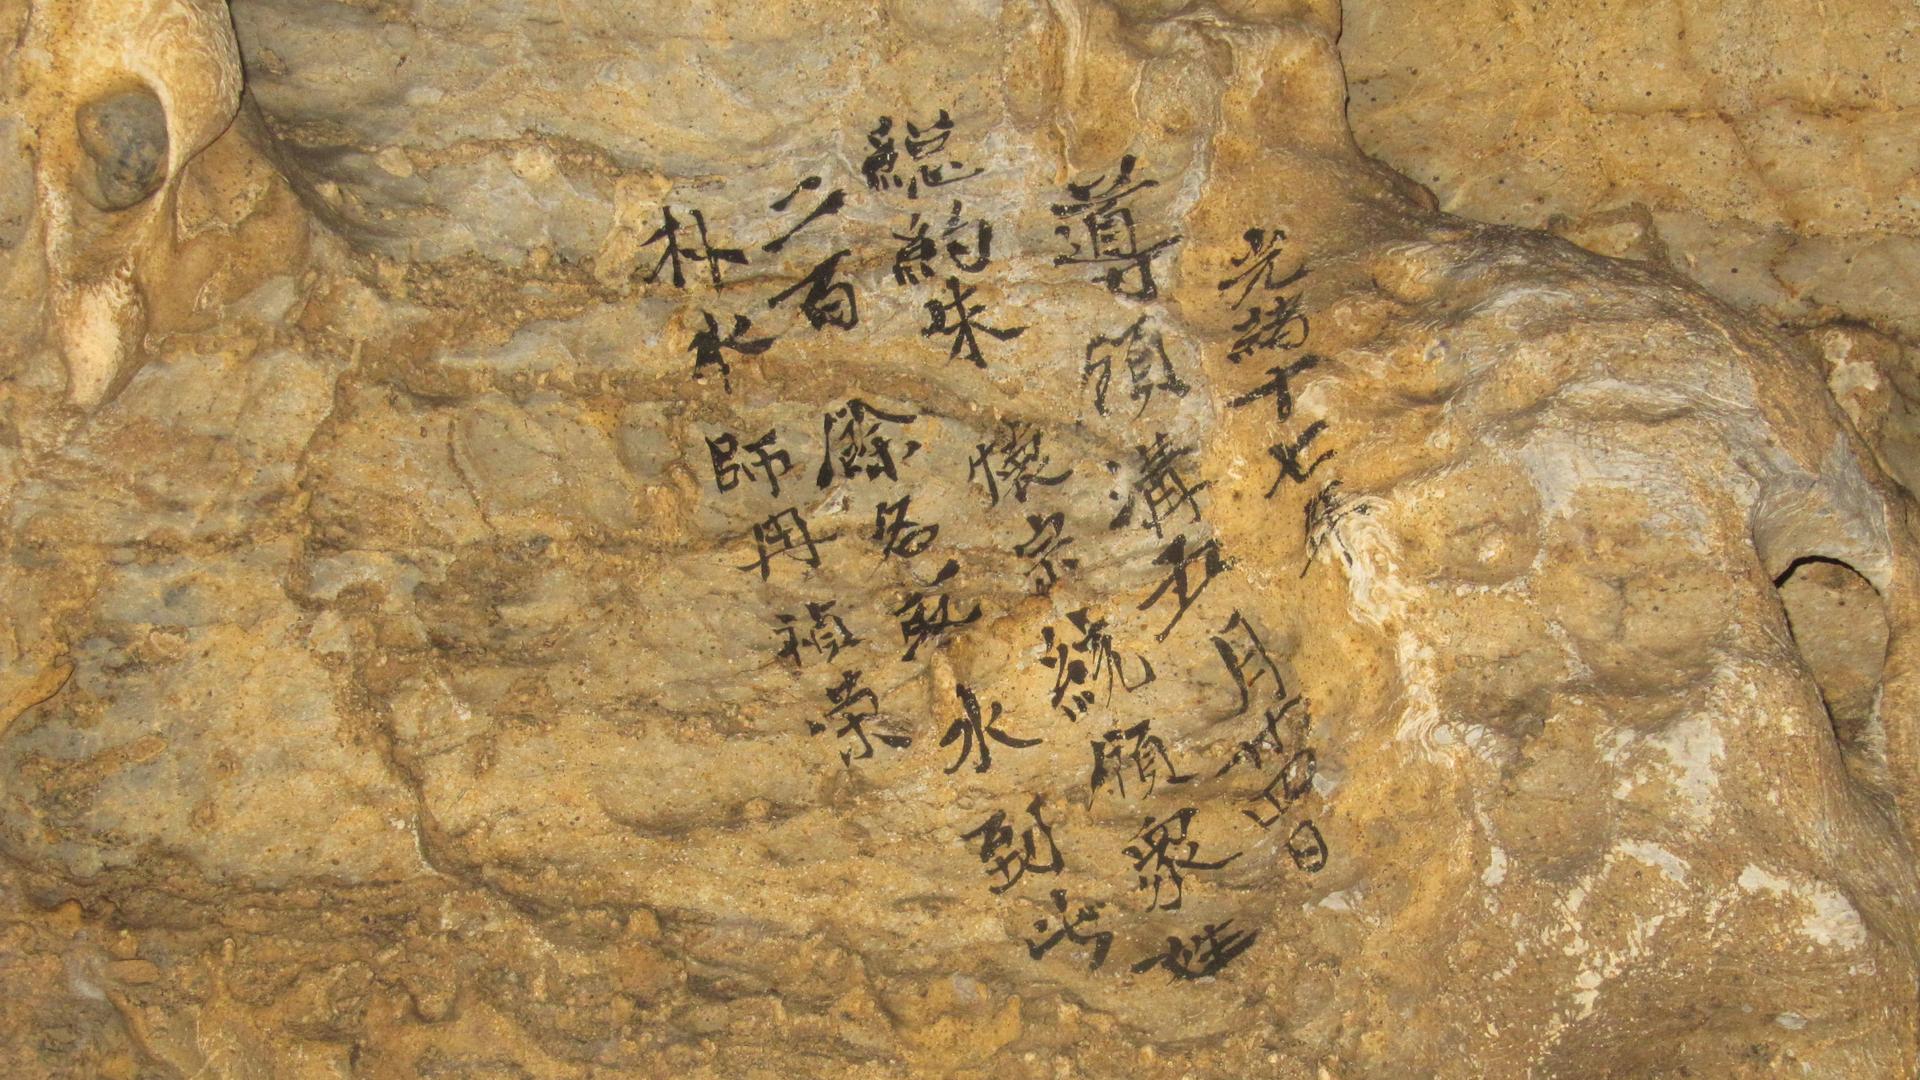 This 1891 inscription talks about a local mayor leading more than 200 people to the cave to get water and pray for rain.